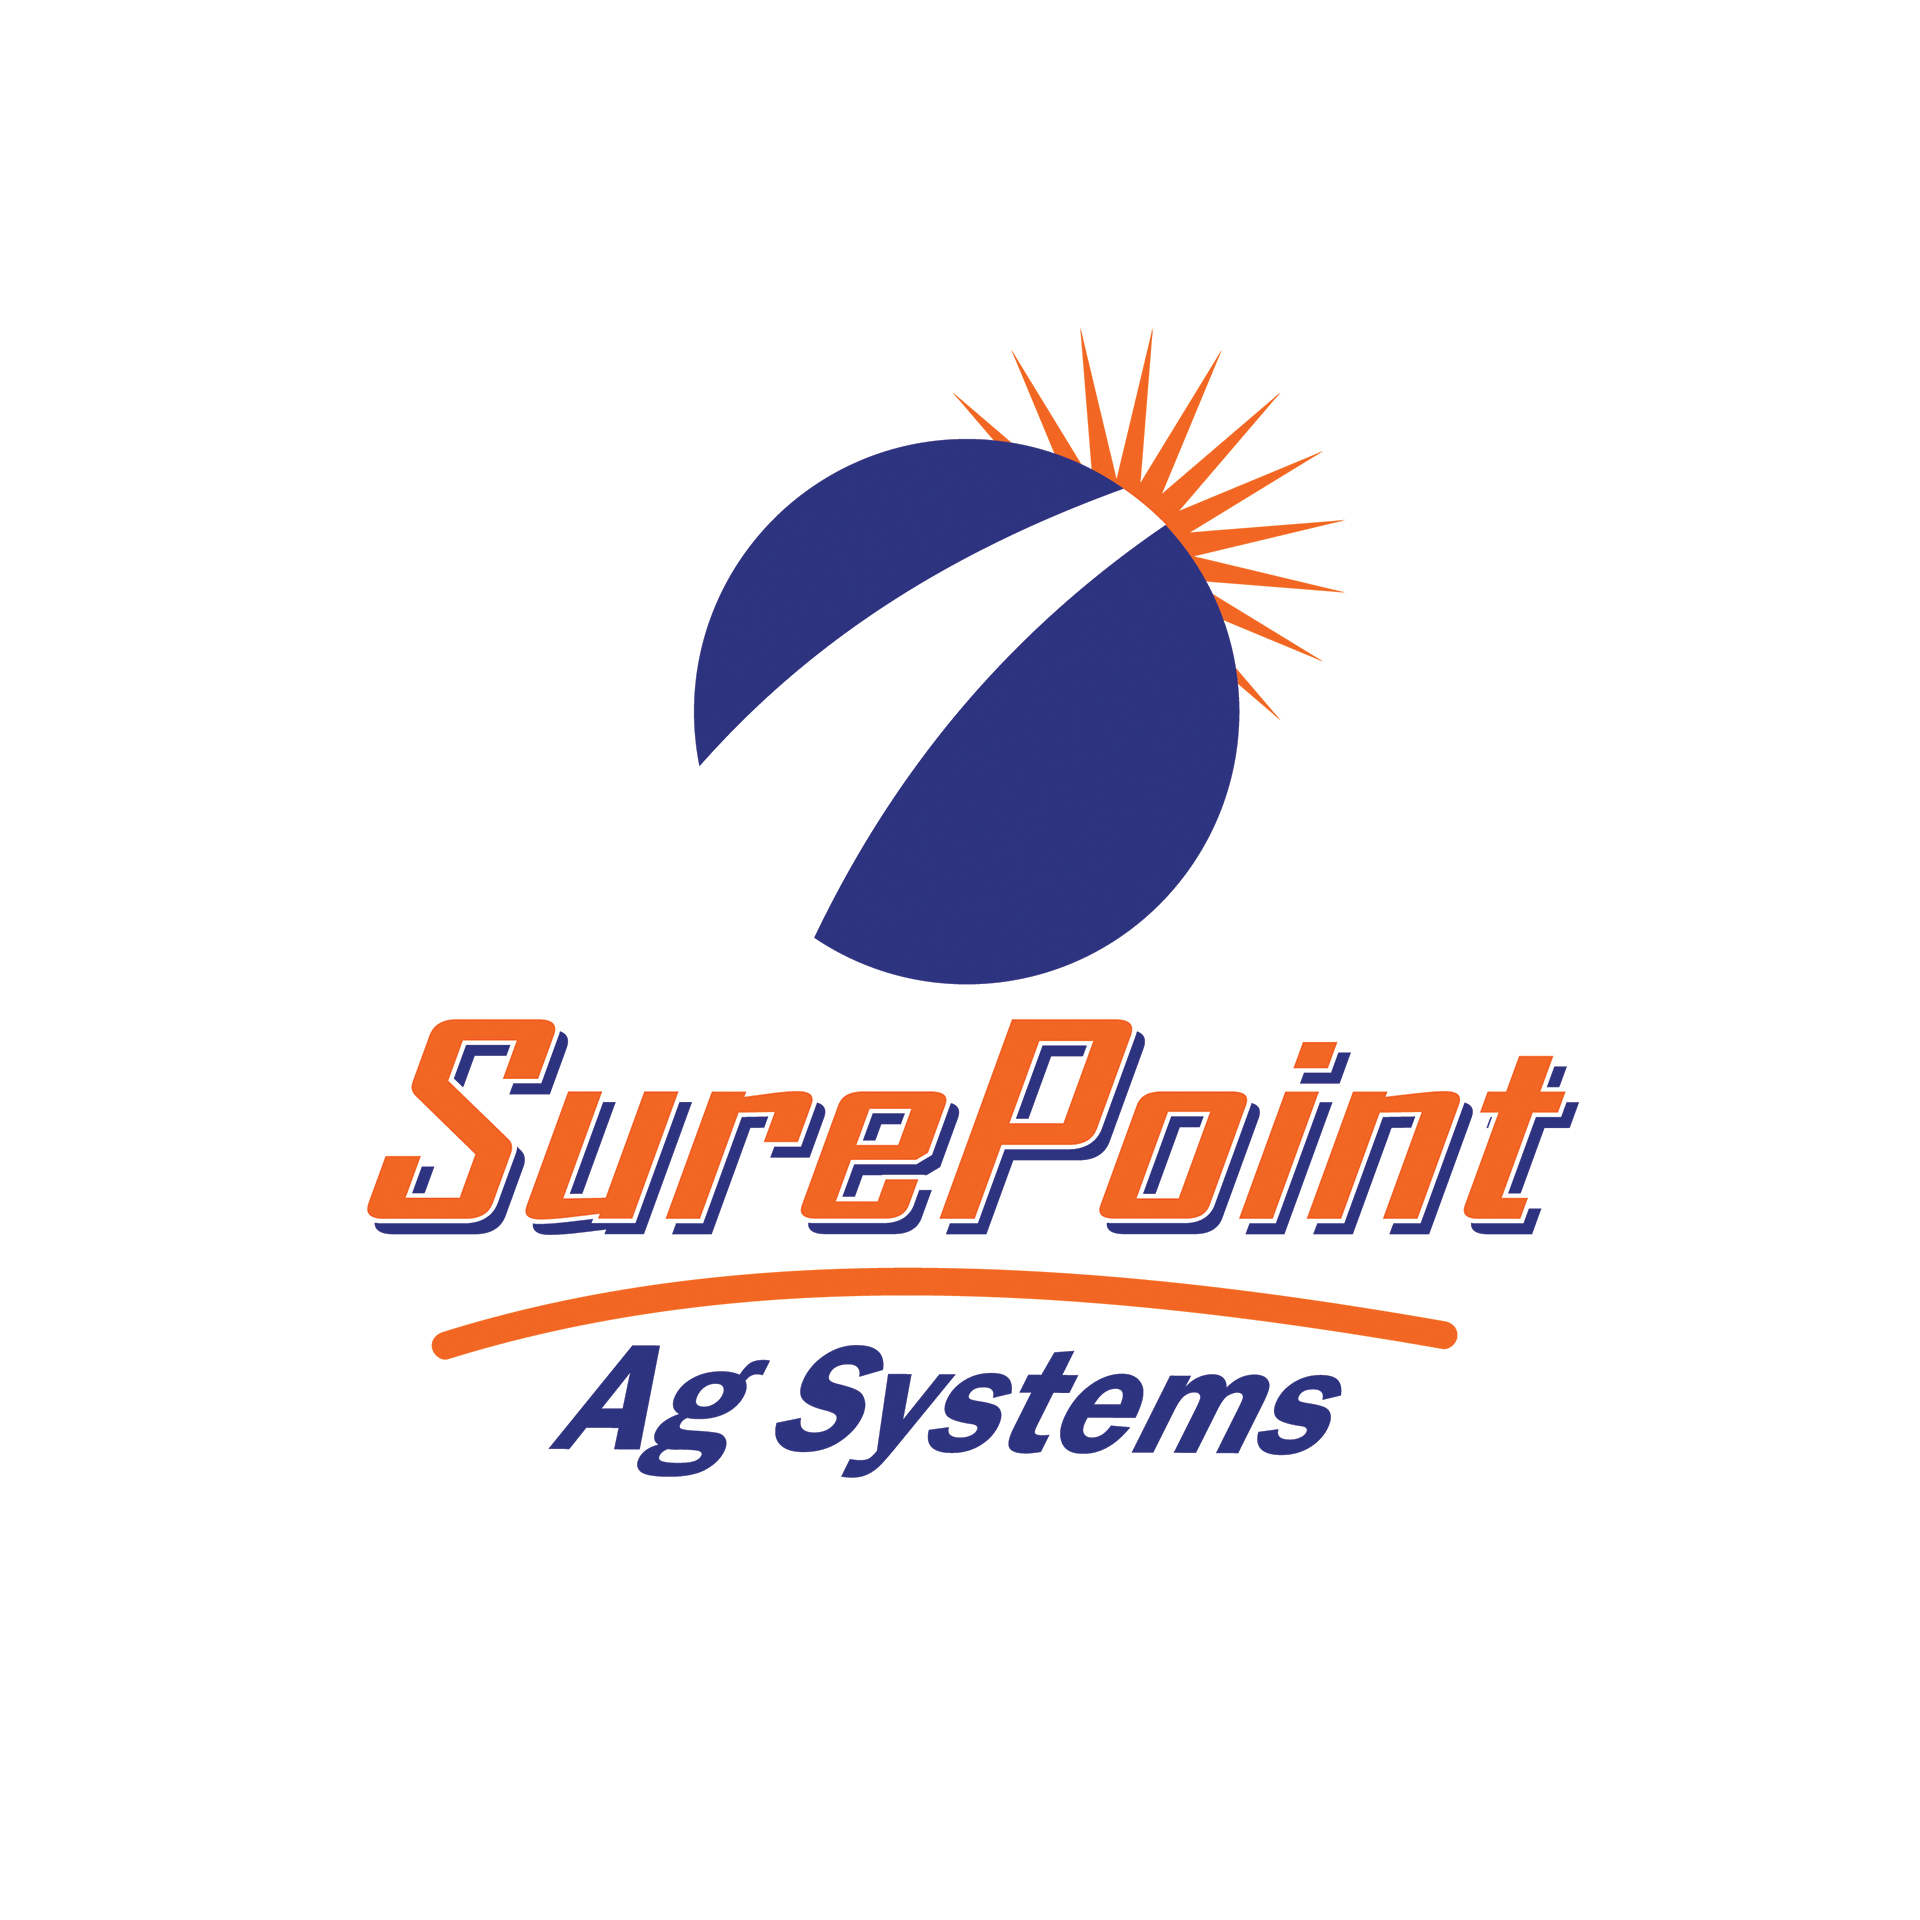 SurePoint Ag Systems